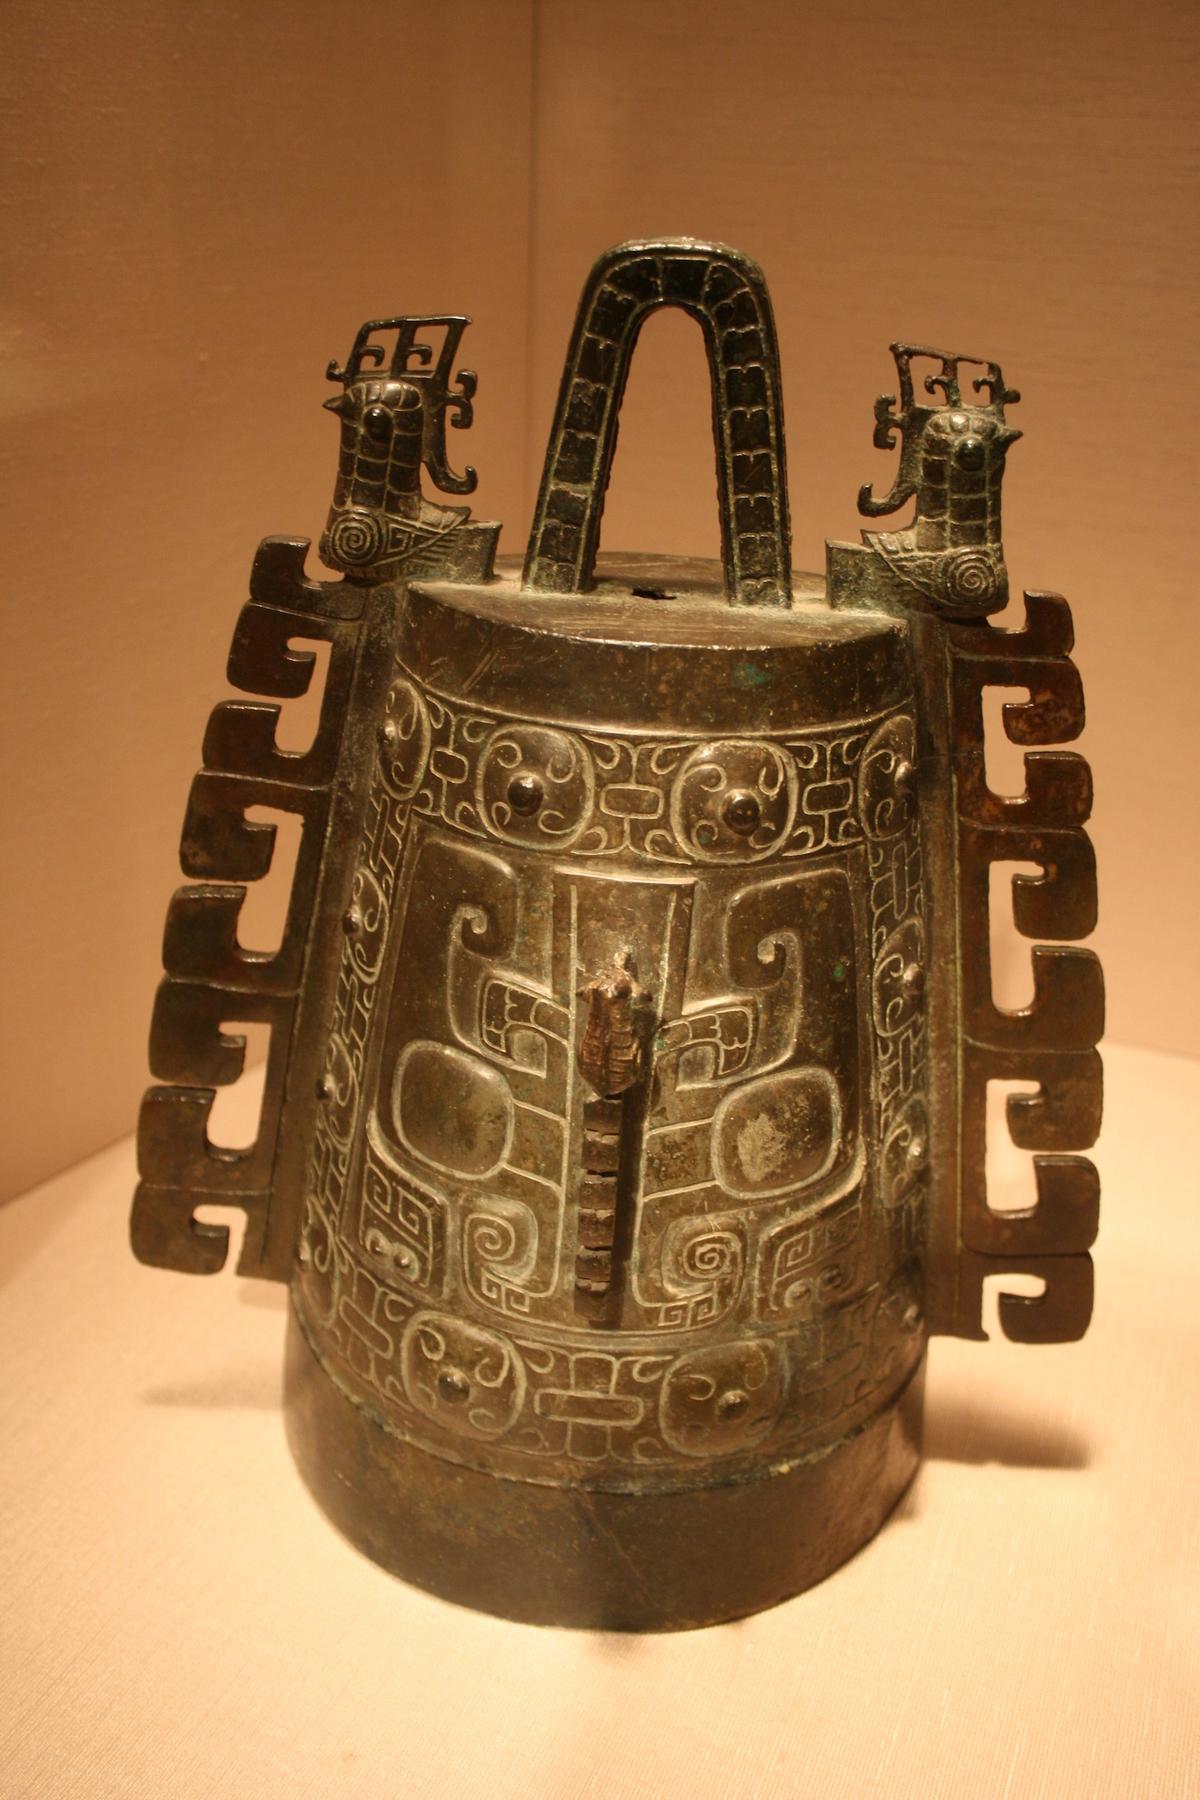 Bronze bell from the 13th century B.C. Shang dynasty, China. (<a href="https://commons.wikimedia.org/wiki/File:13th-12th_Cent._BC_Shang_Bronze_Bell.jpg">Gary Todd</a>/CC0 1.0)